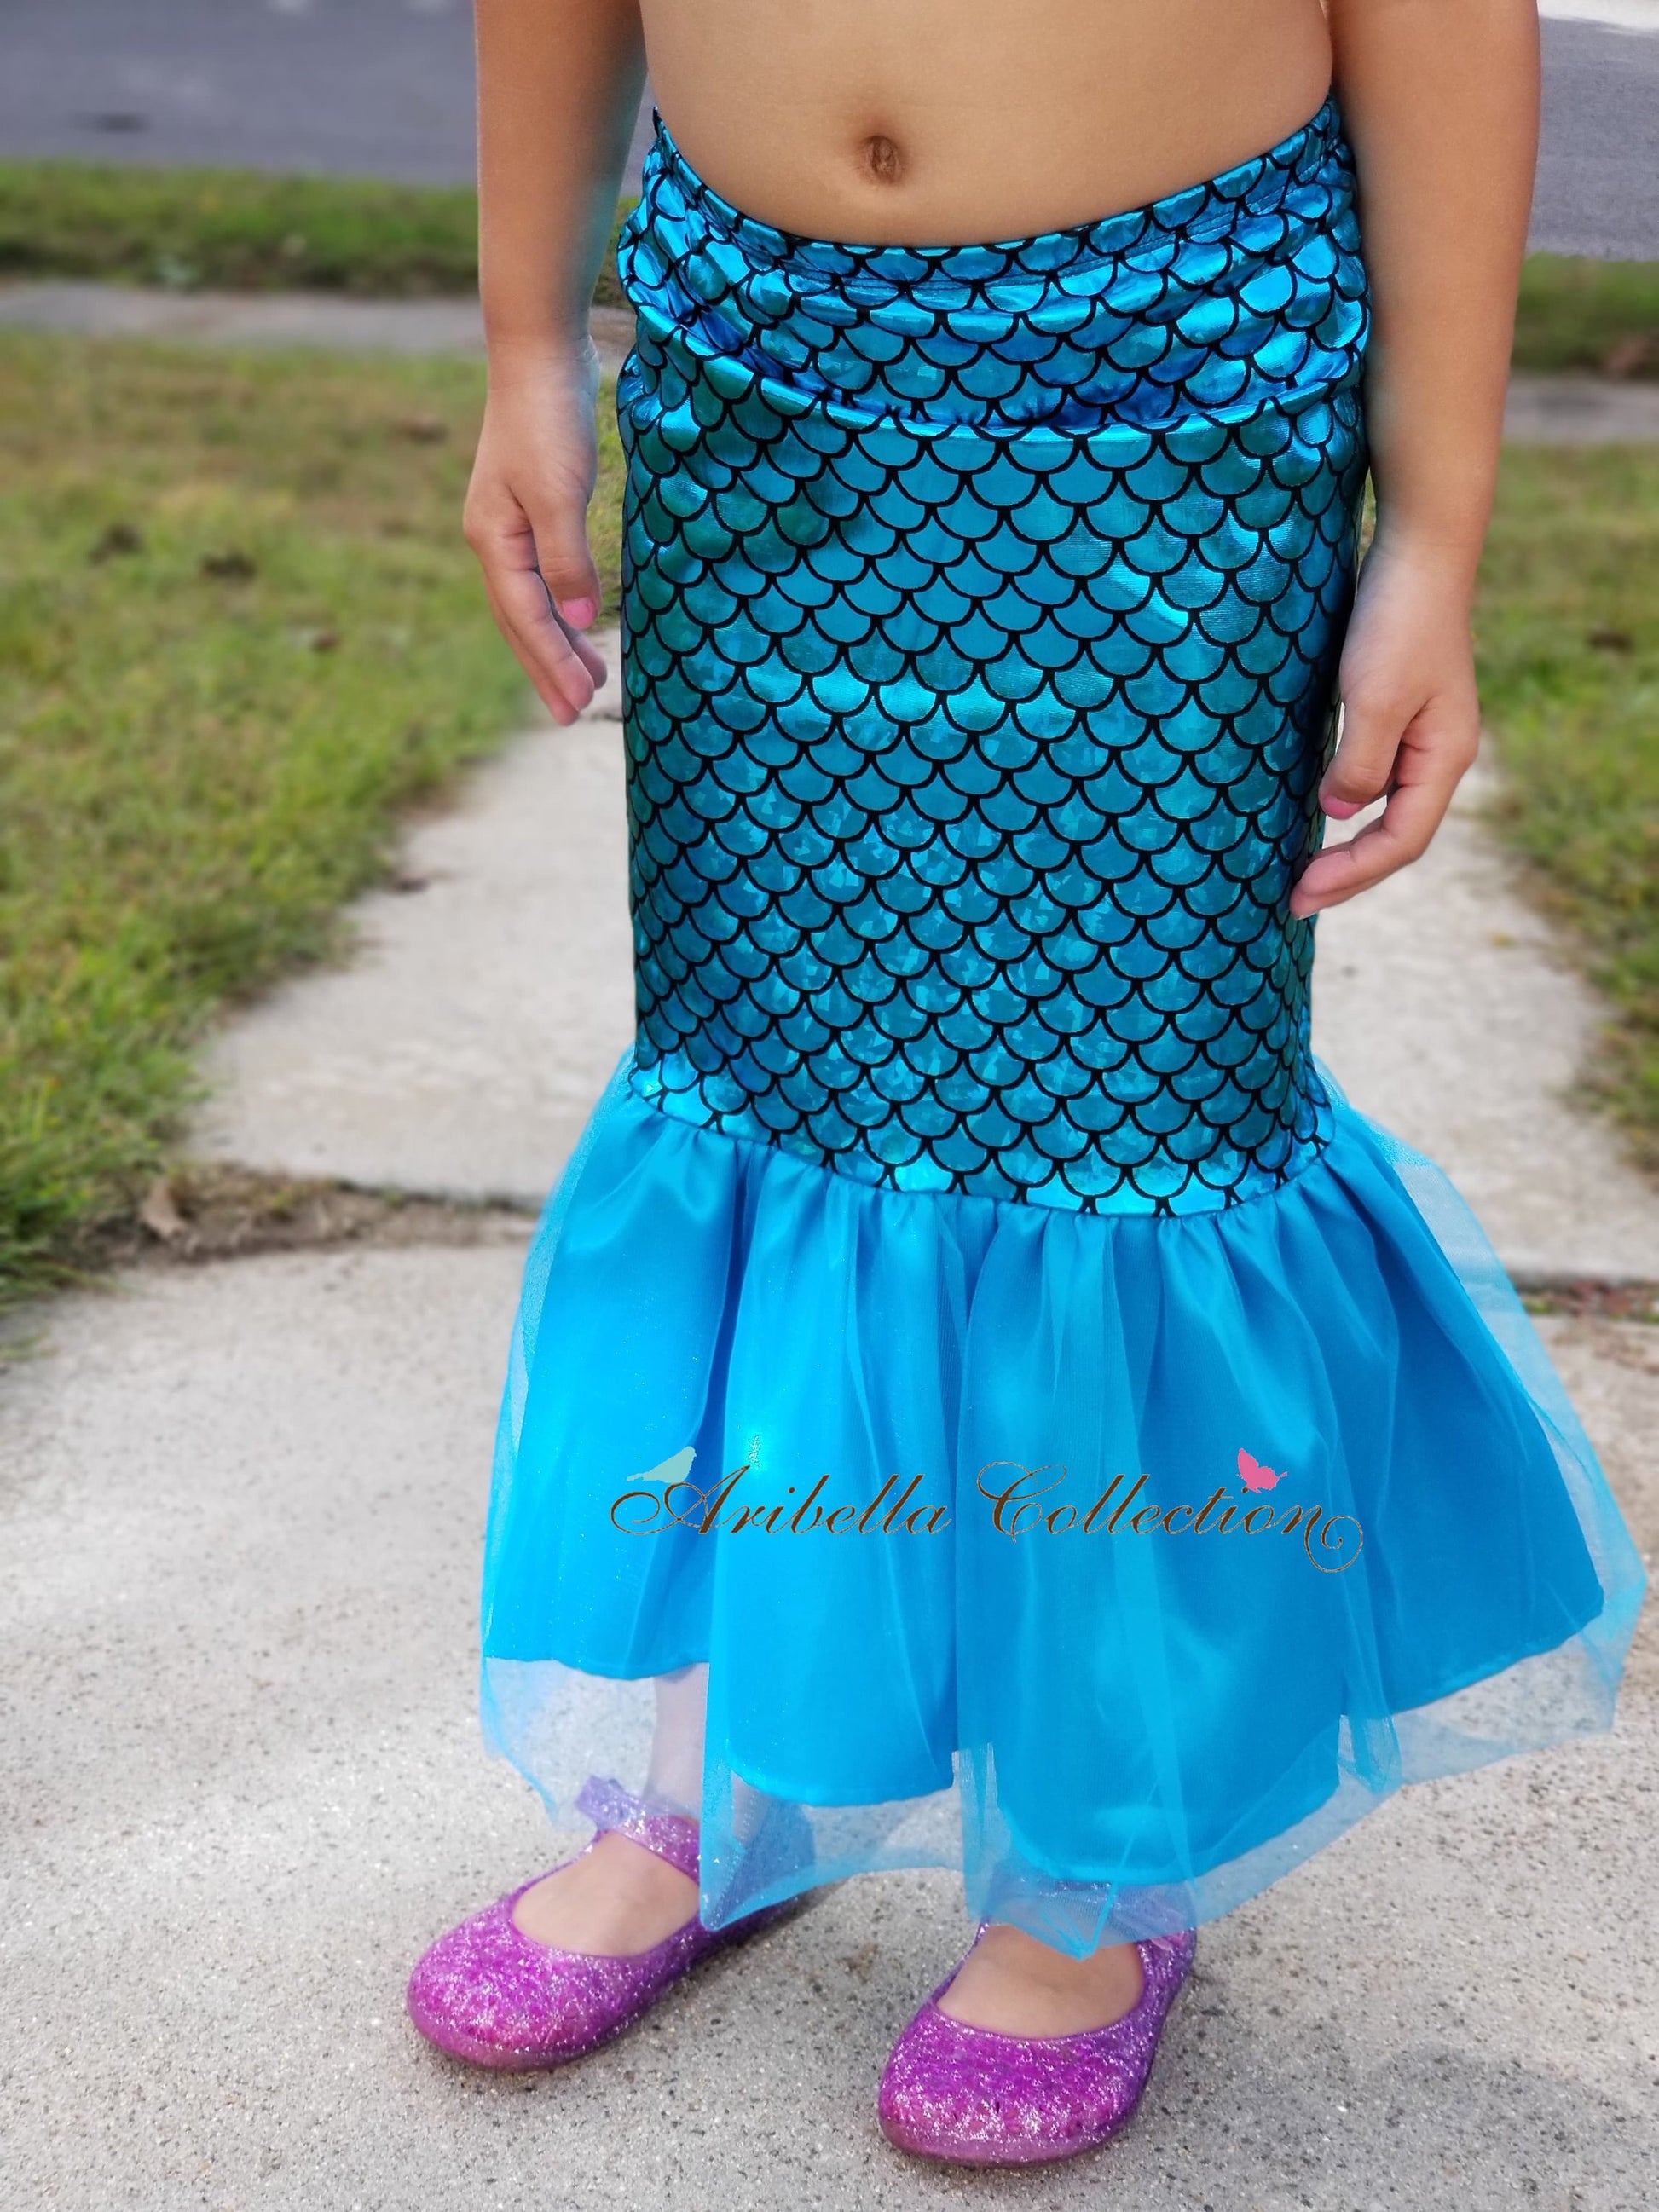 Mermaid Heart w/ Age# Outfit - Bodysuit or T-shirt, Skirt, & Bow - Aribella Collection, Inc.